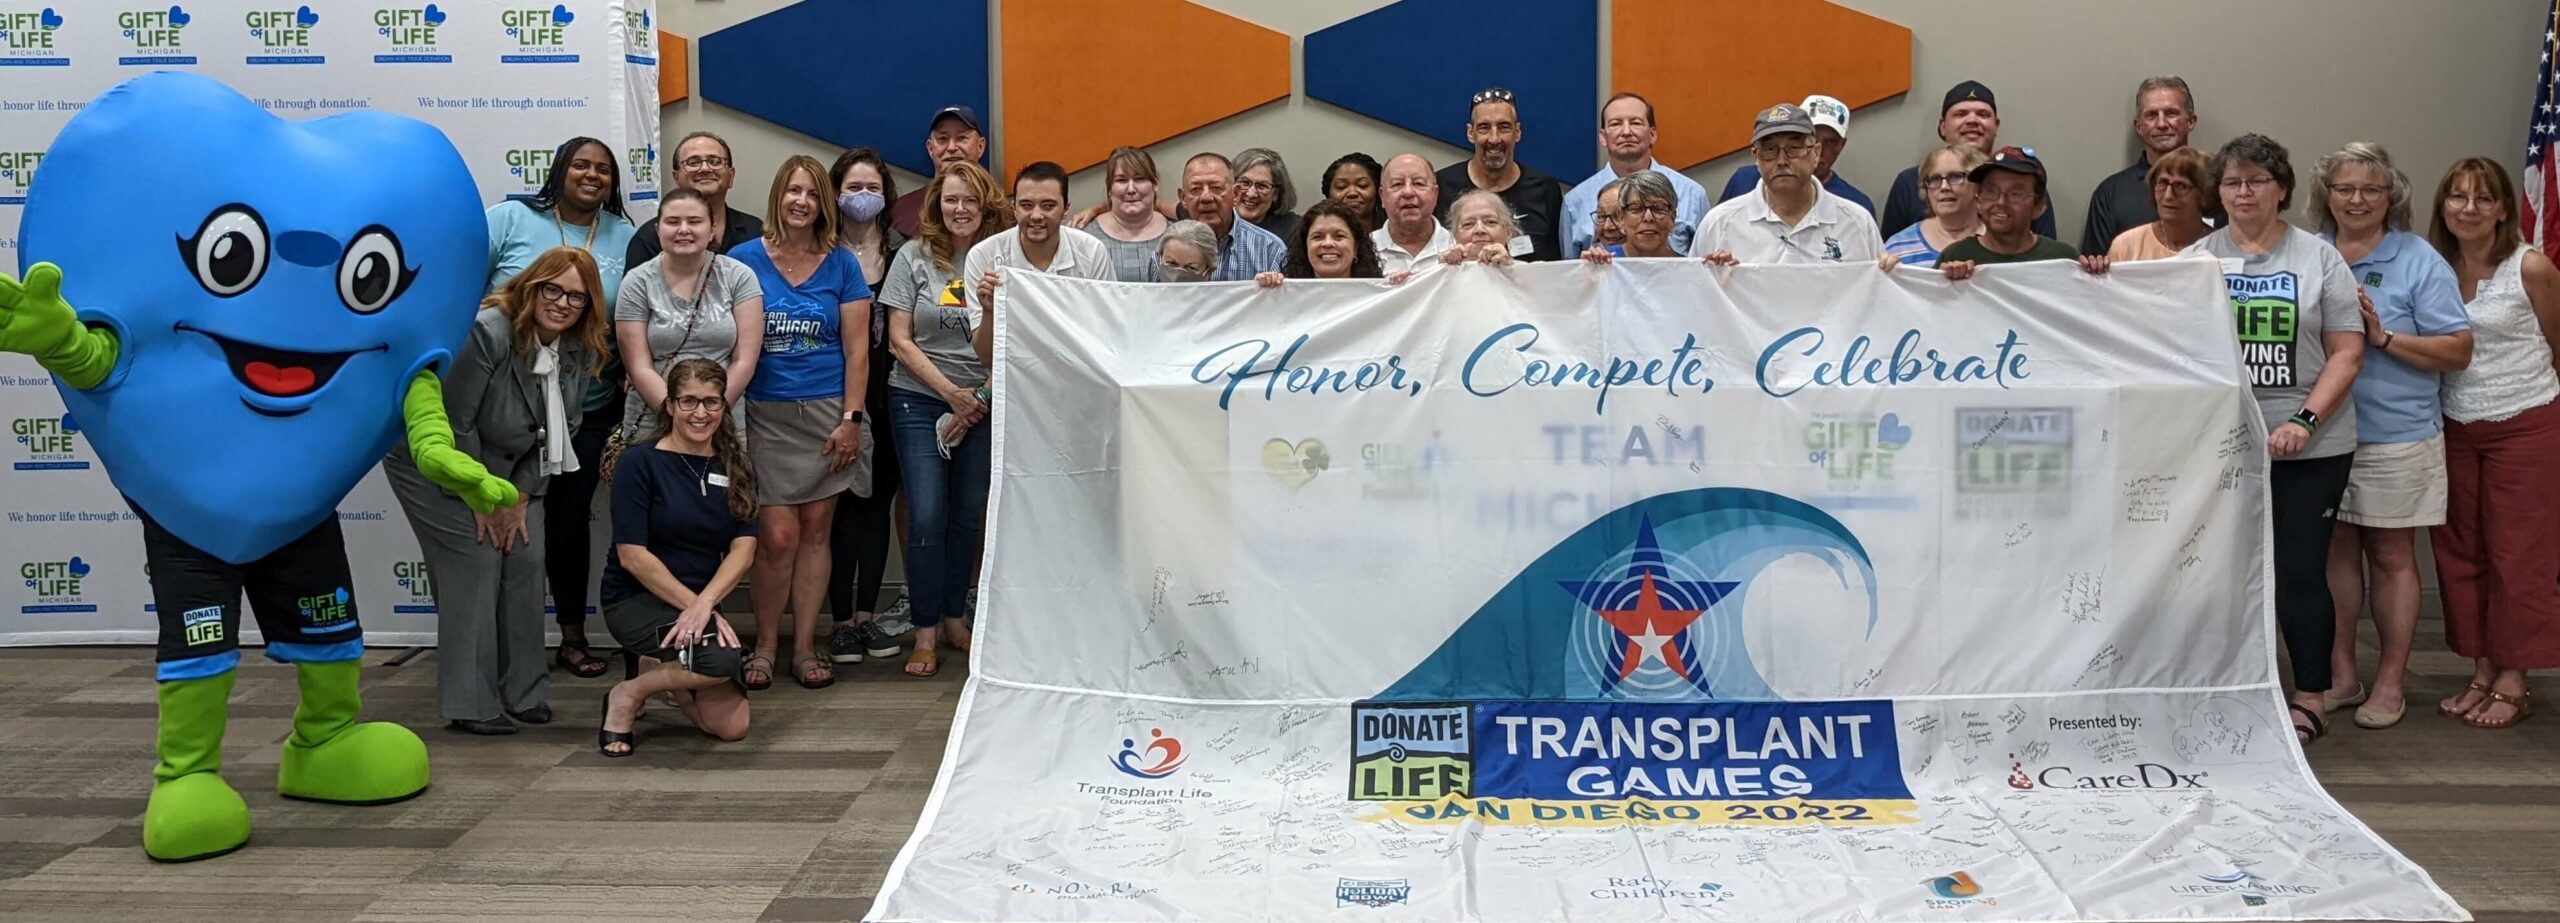 Group photo of Team Michigan holding up the autographed Transplant Games of America flag